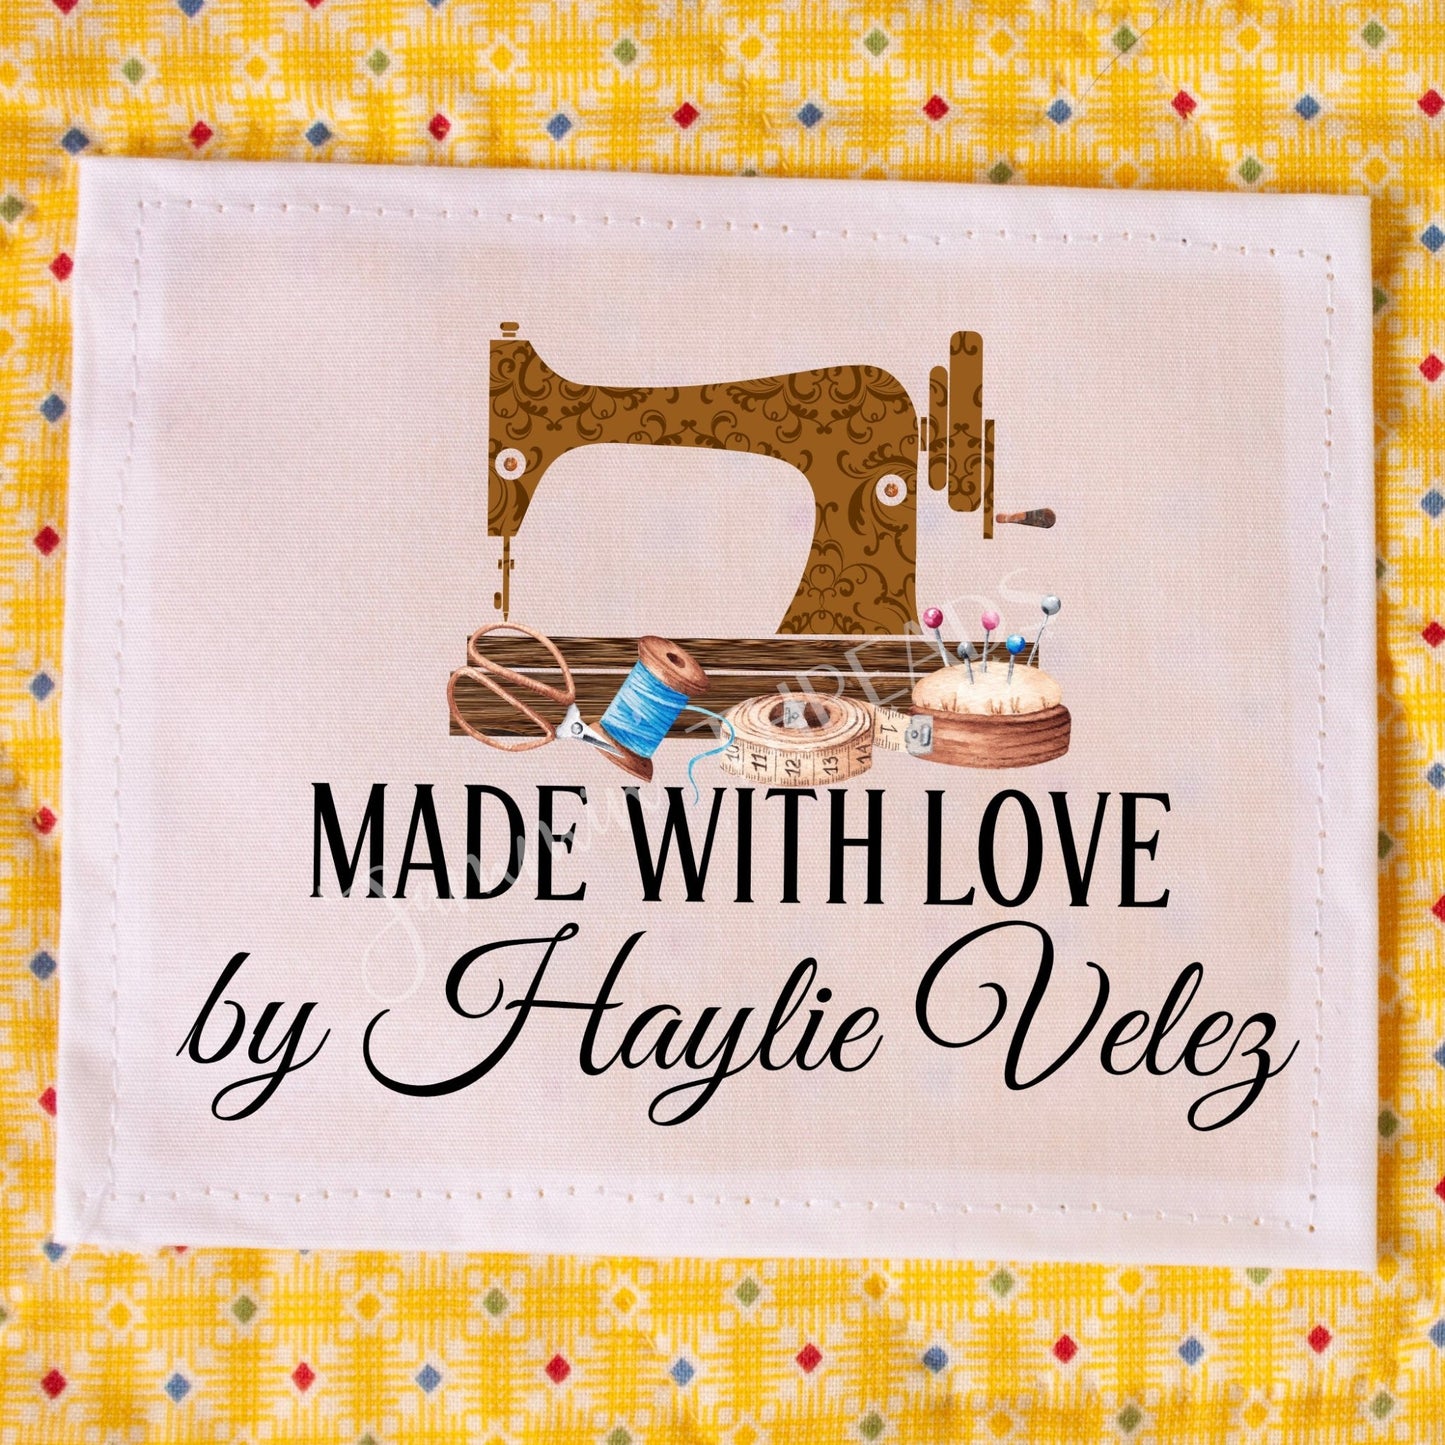 Modern, Personalized Quilt Labels showing Sewing Machine and Accessories - Jammin Threads